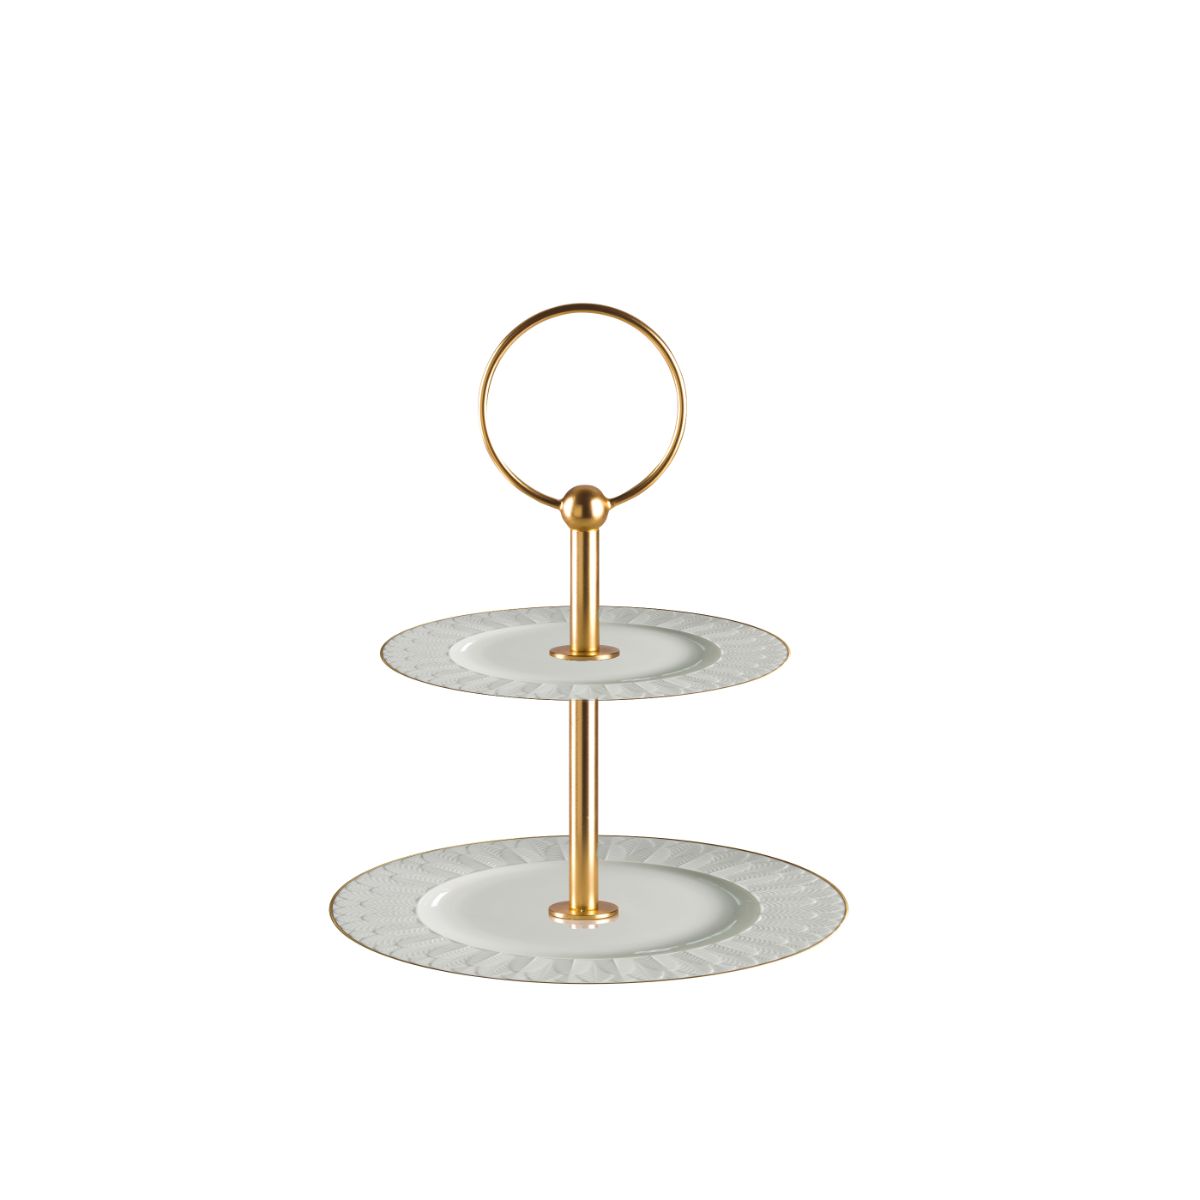 Peacock White & Gold 2 Tier Cake Stand